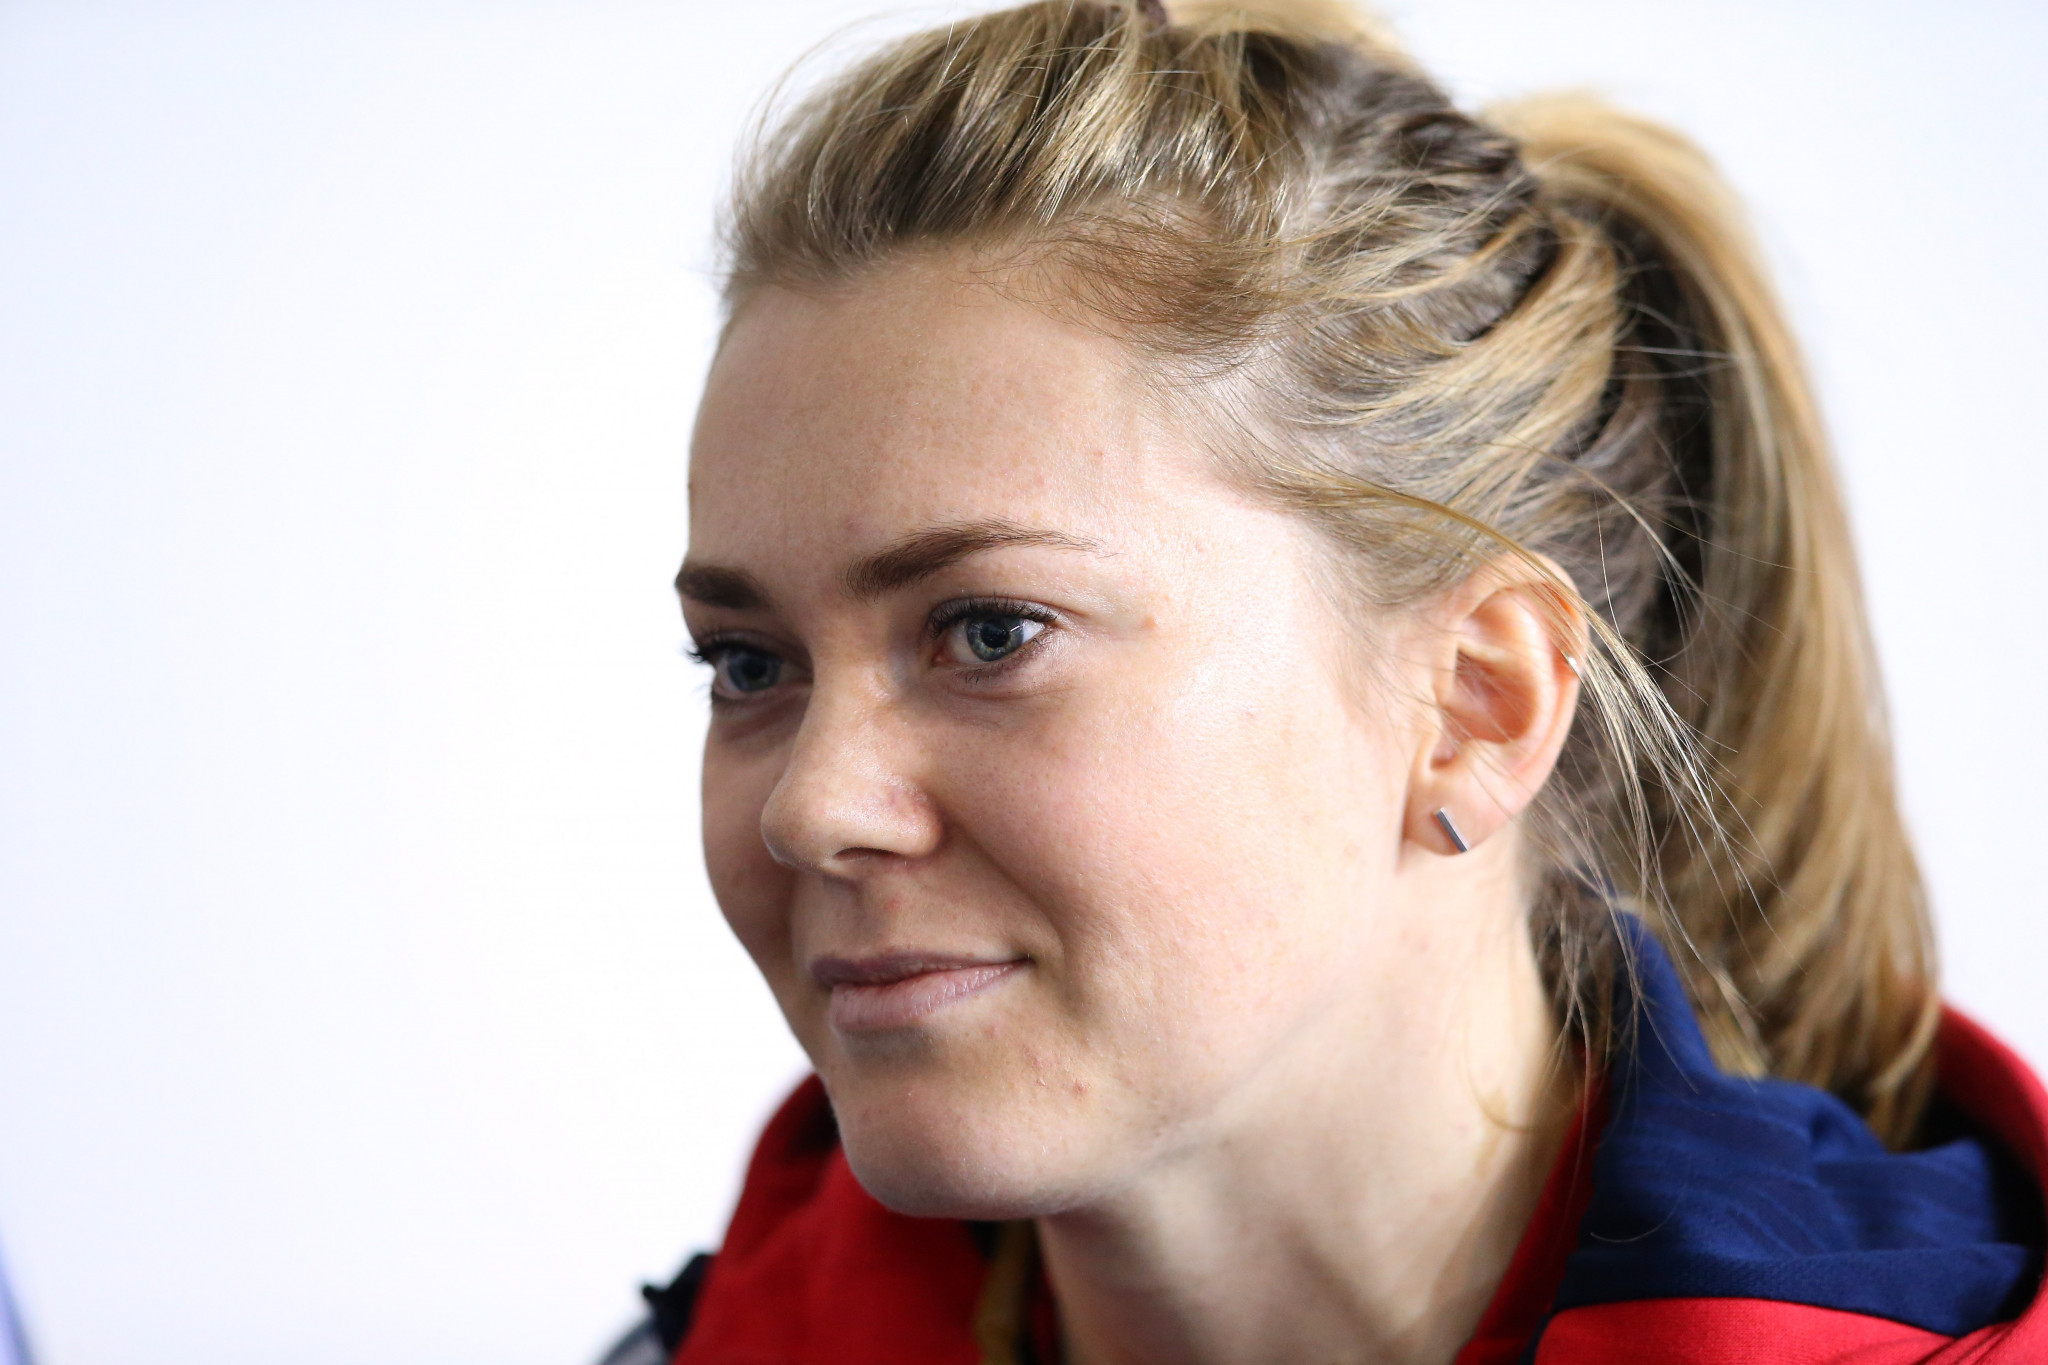 Former British cyclist Jess Varnish today told an employment tribunal that she experienced "extreme control" under British cycling that was akin to that of an employer ©Getty Images